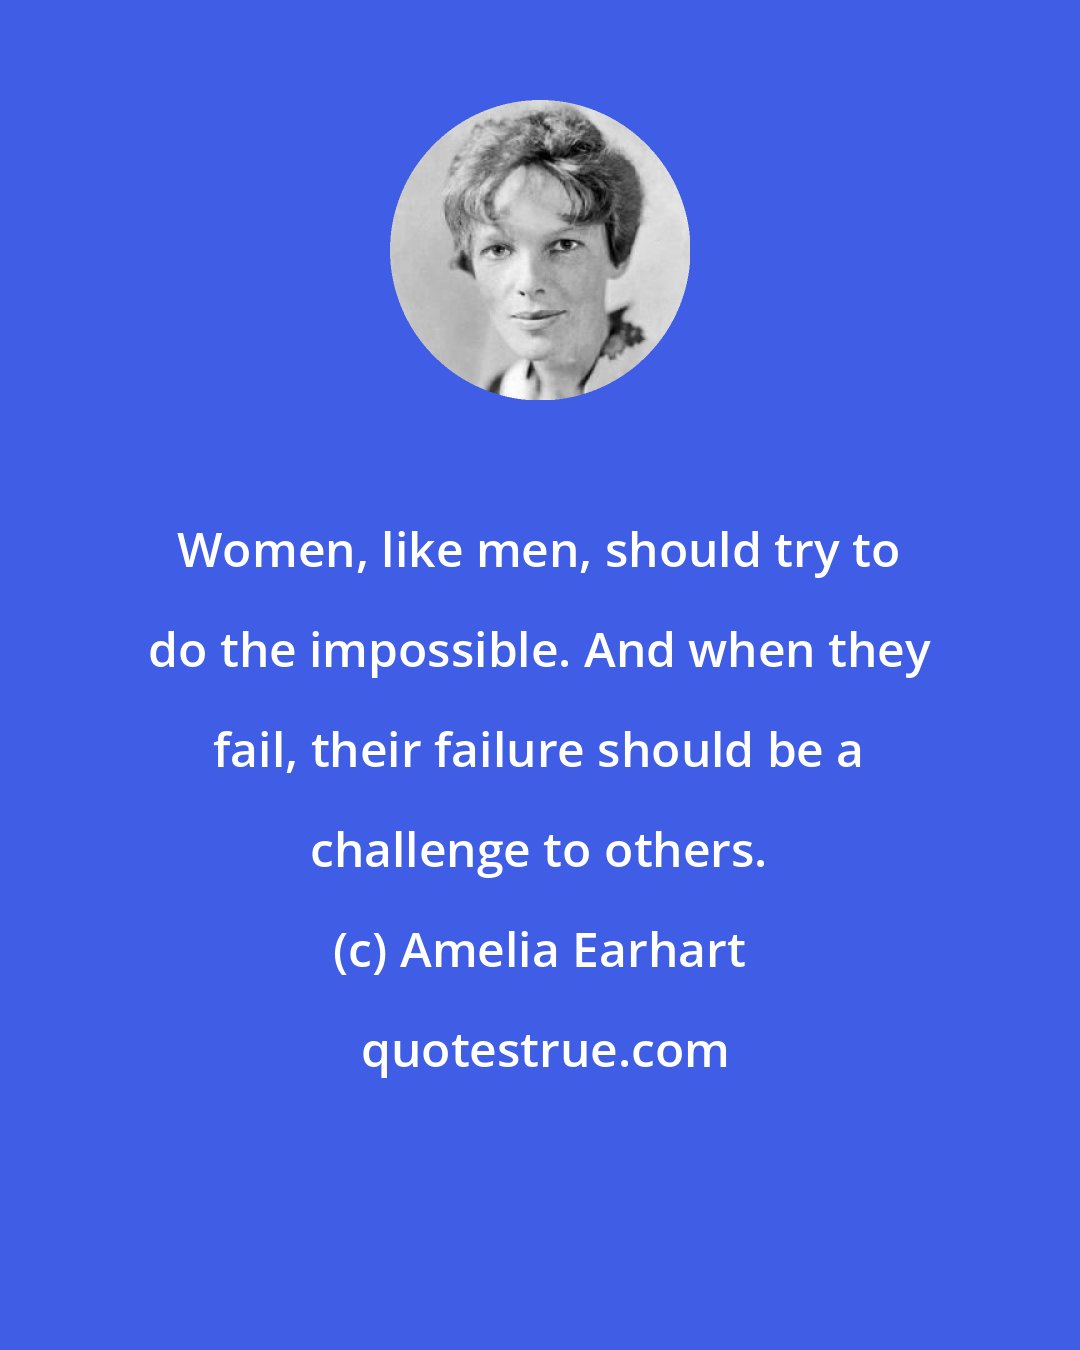 Amelia Earhart: Women, like men, should try to do the impossible. And when they fail, their failure should be a challenge to others.